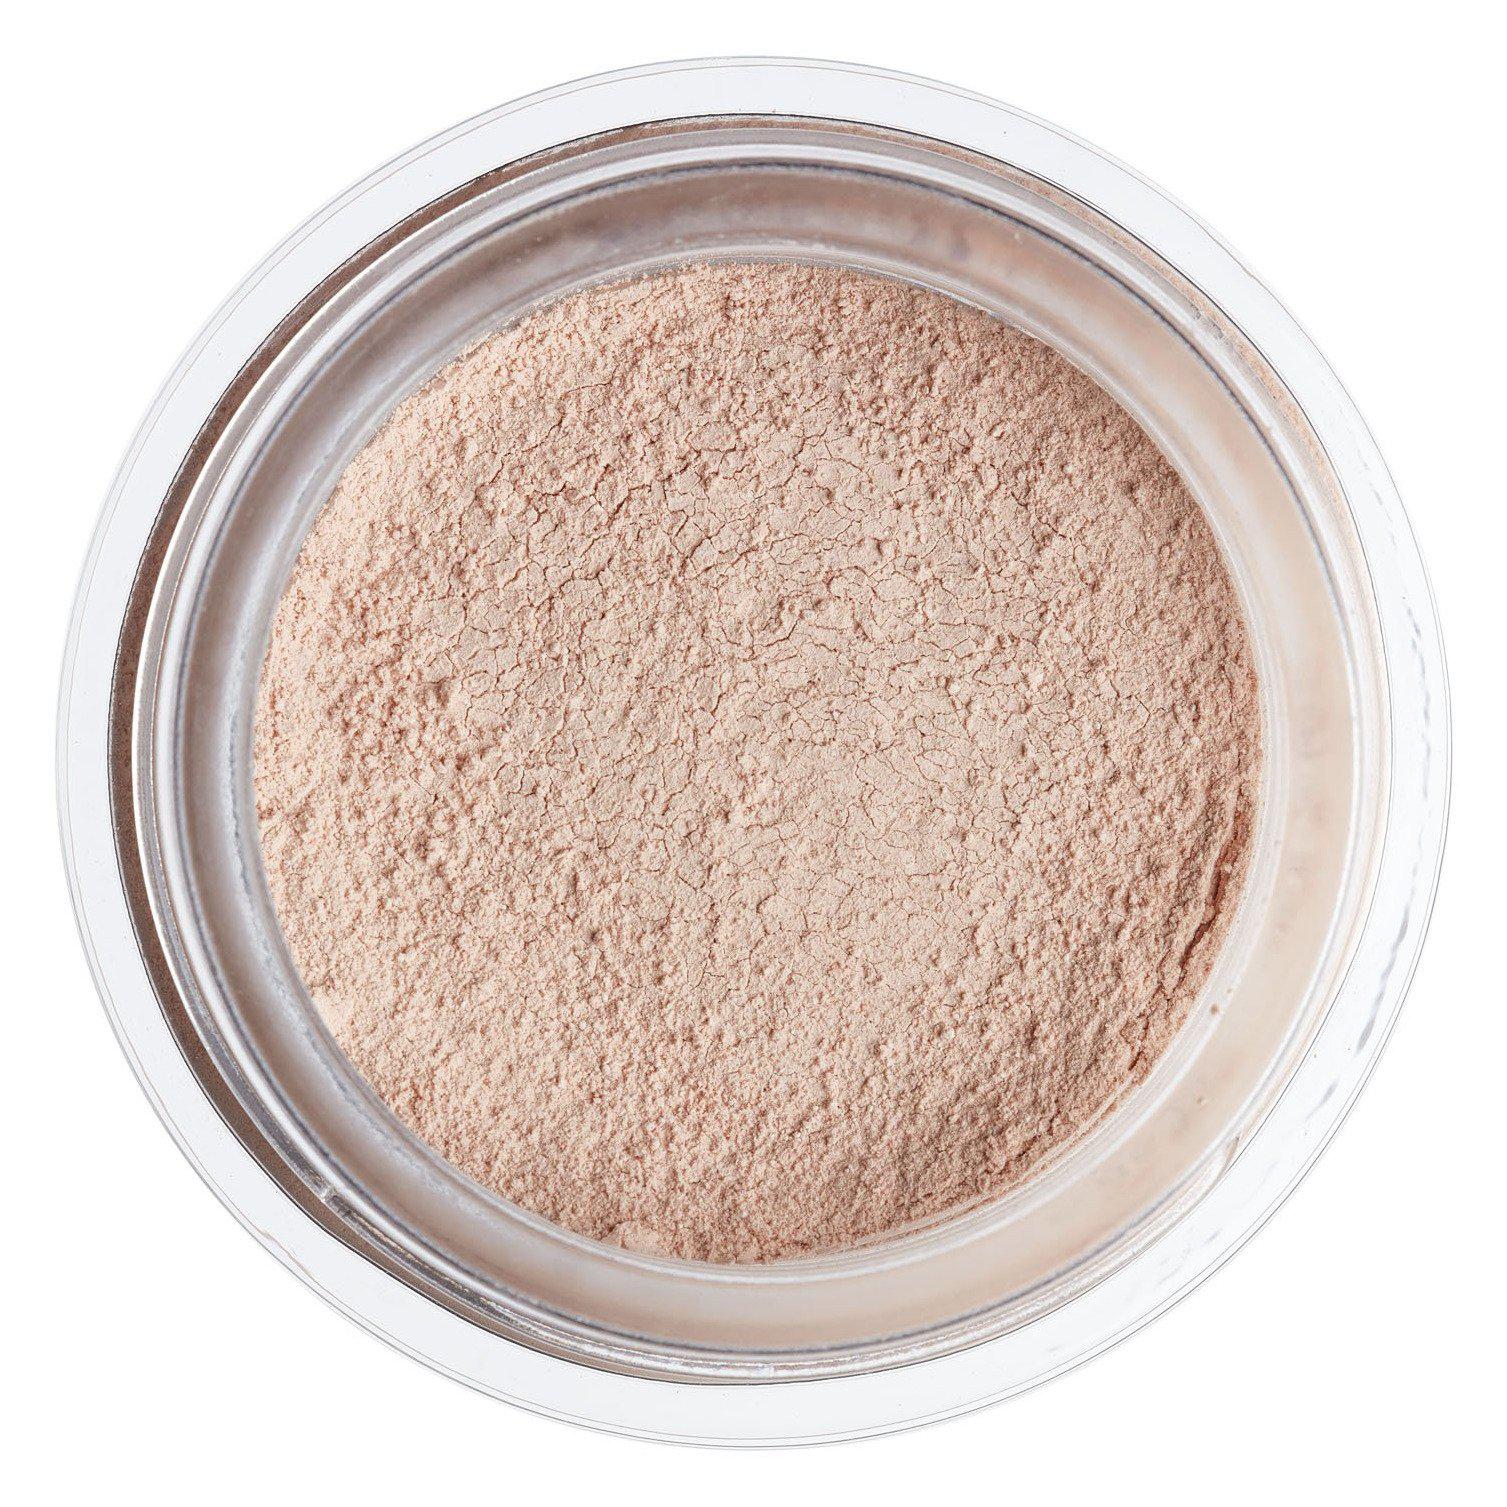 Rose Clay Mask - 120ml-Beauty & Well-Being-Summer Salt Body-The Bay Room